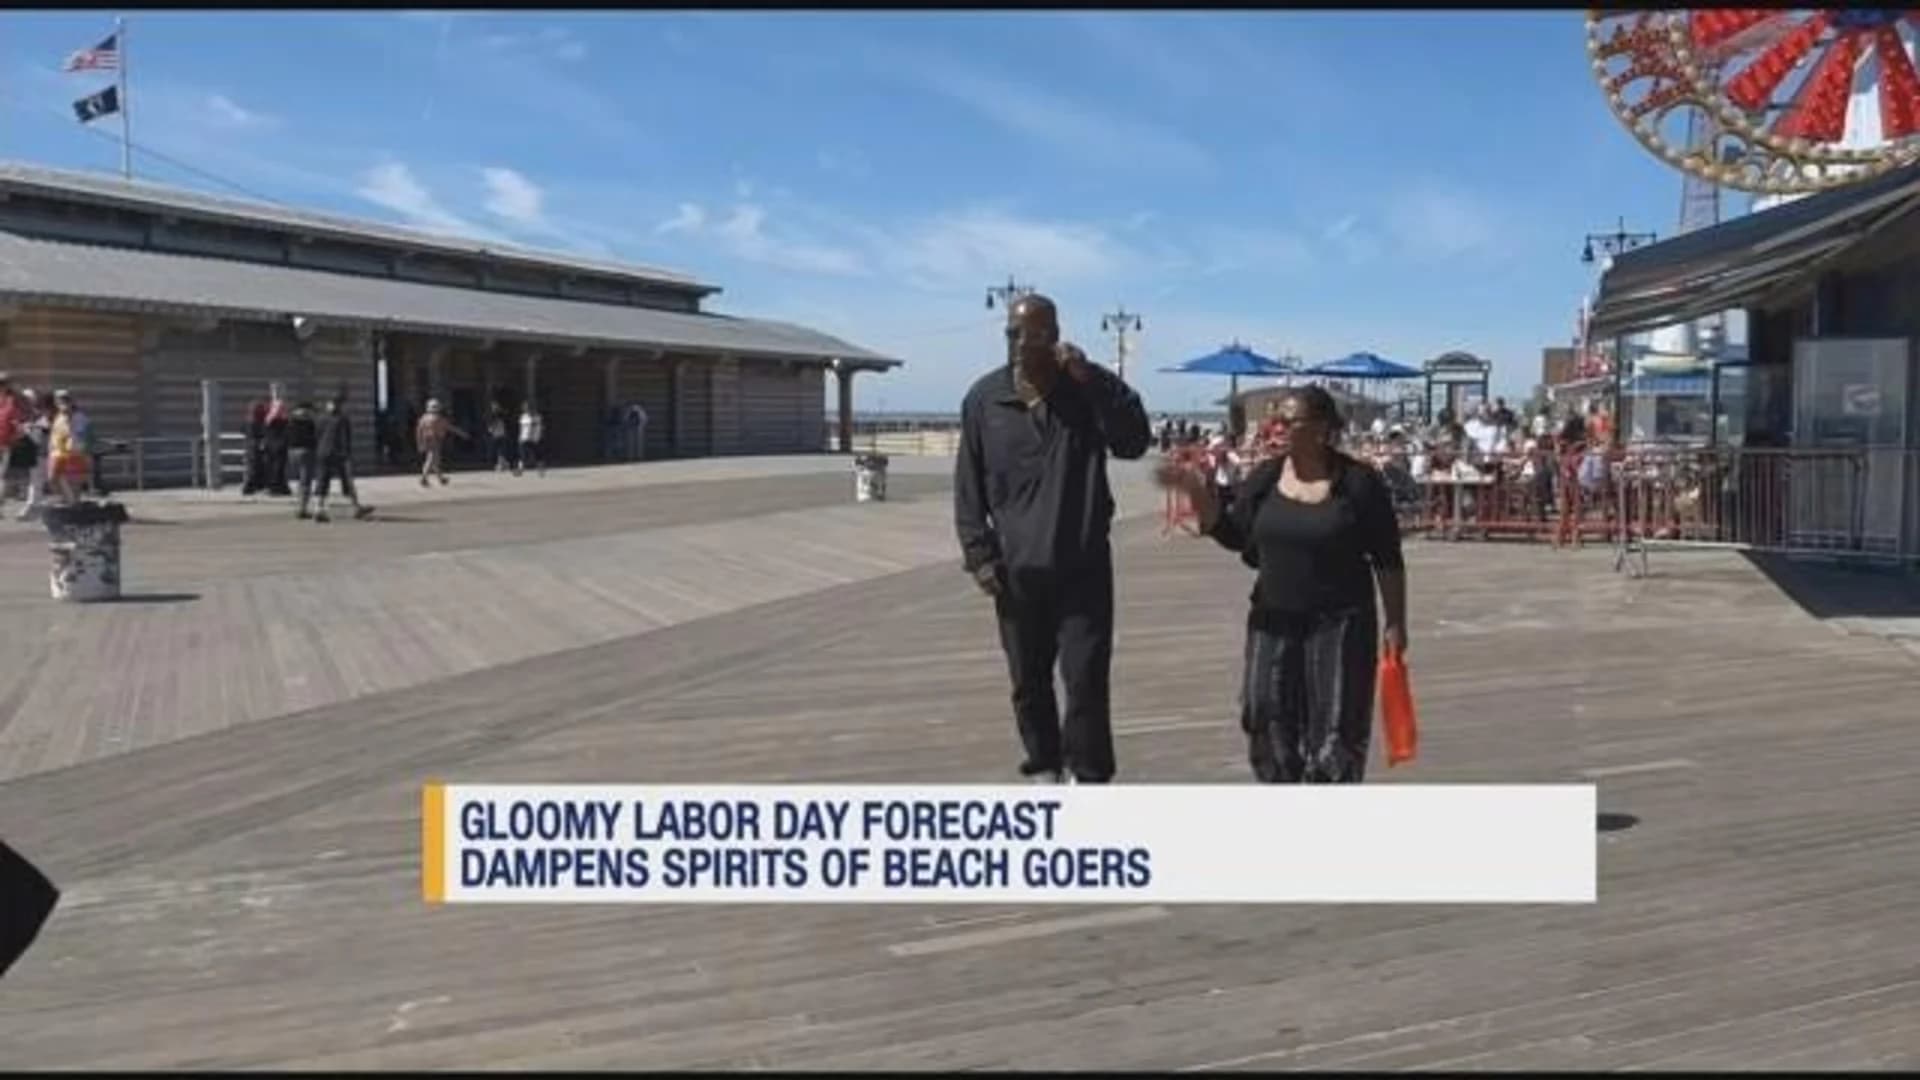 Coney Island patrons soaking up end of summer despite cool forecast